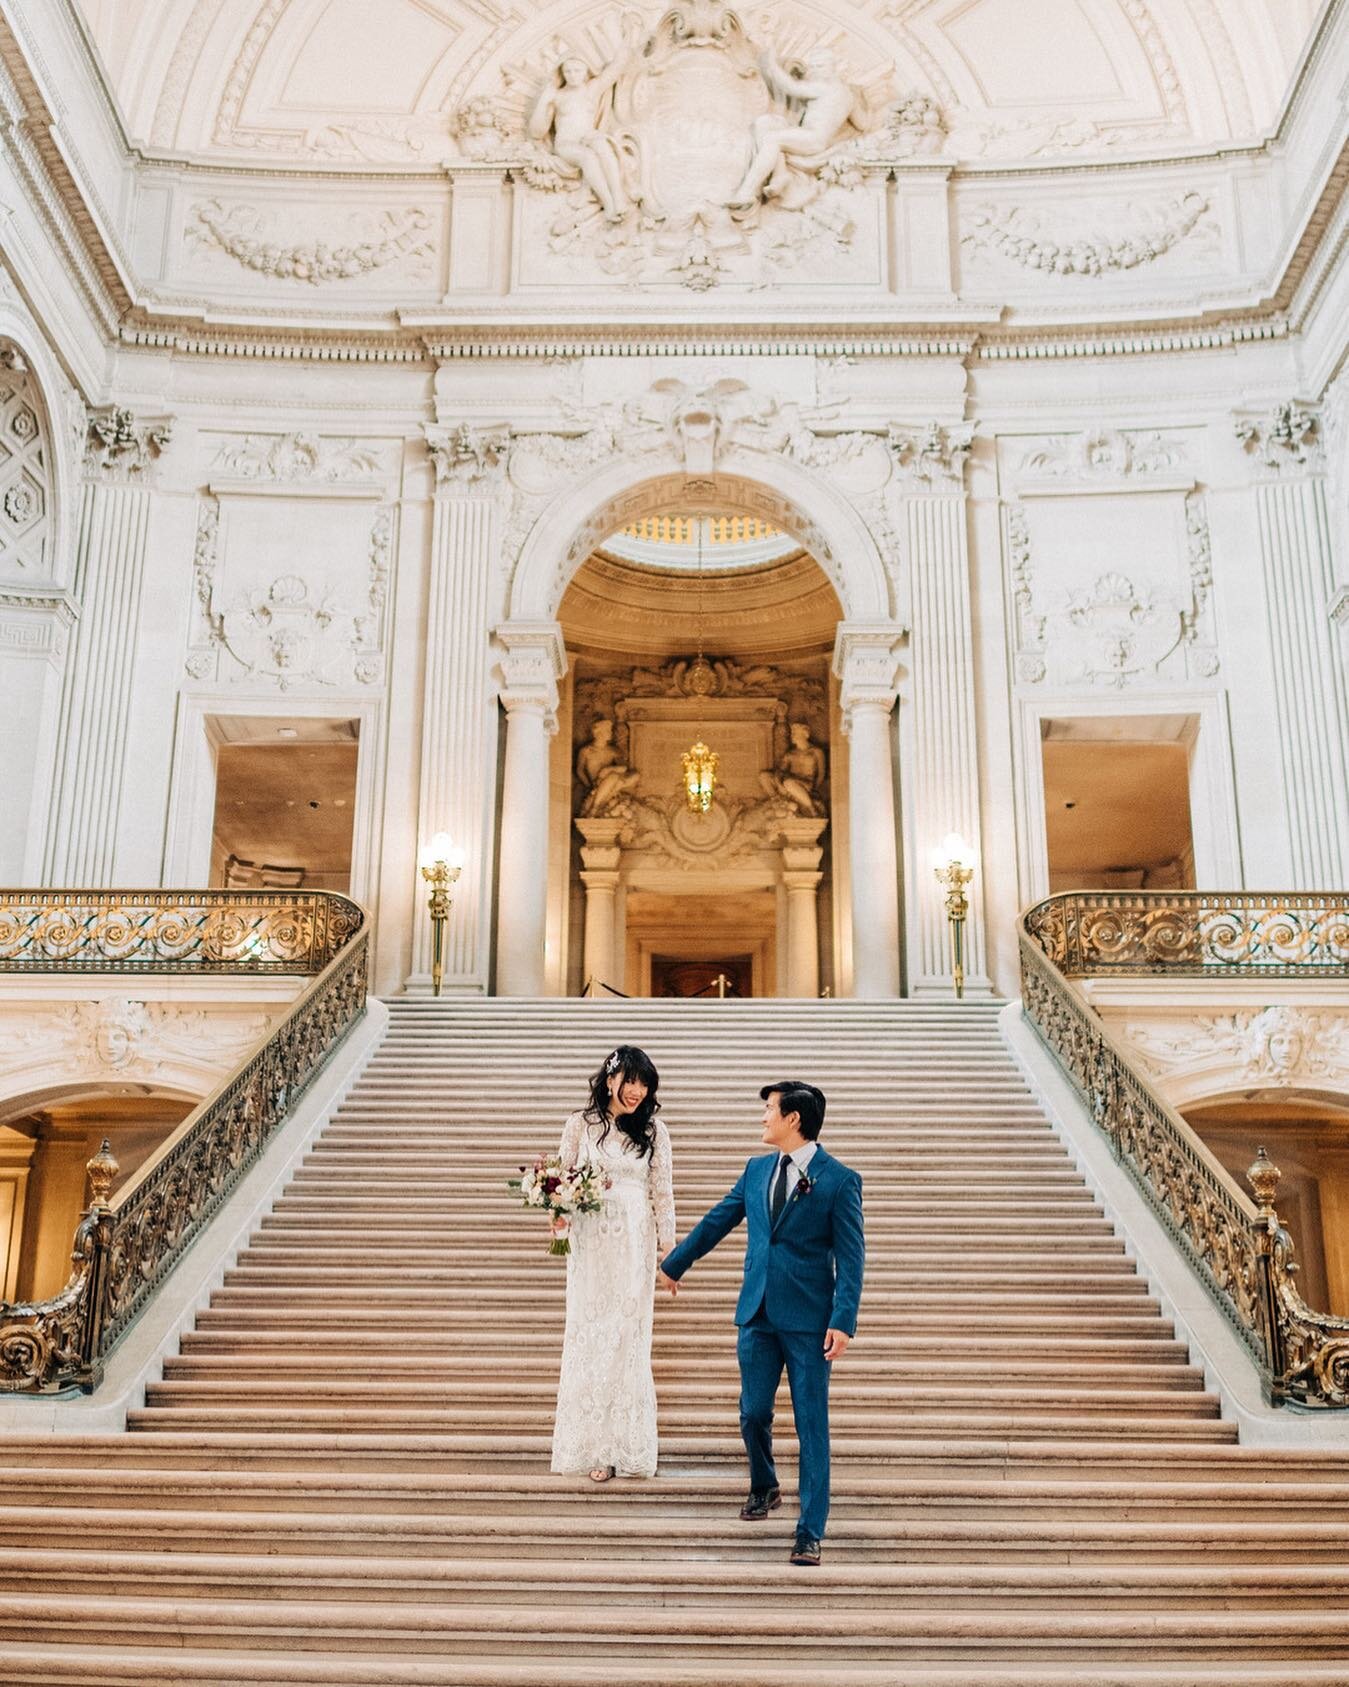 Pro tip 👉🏻 Schedule your city hall civil ceremony for early in the day, Mon-Wed! 
We'll have better opportunities to get that epic staircase shot without dozens of people walking through 🙌🏻🤩